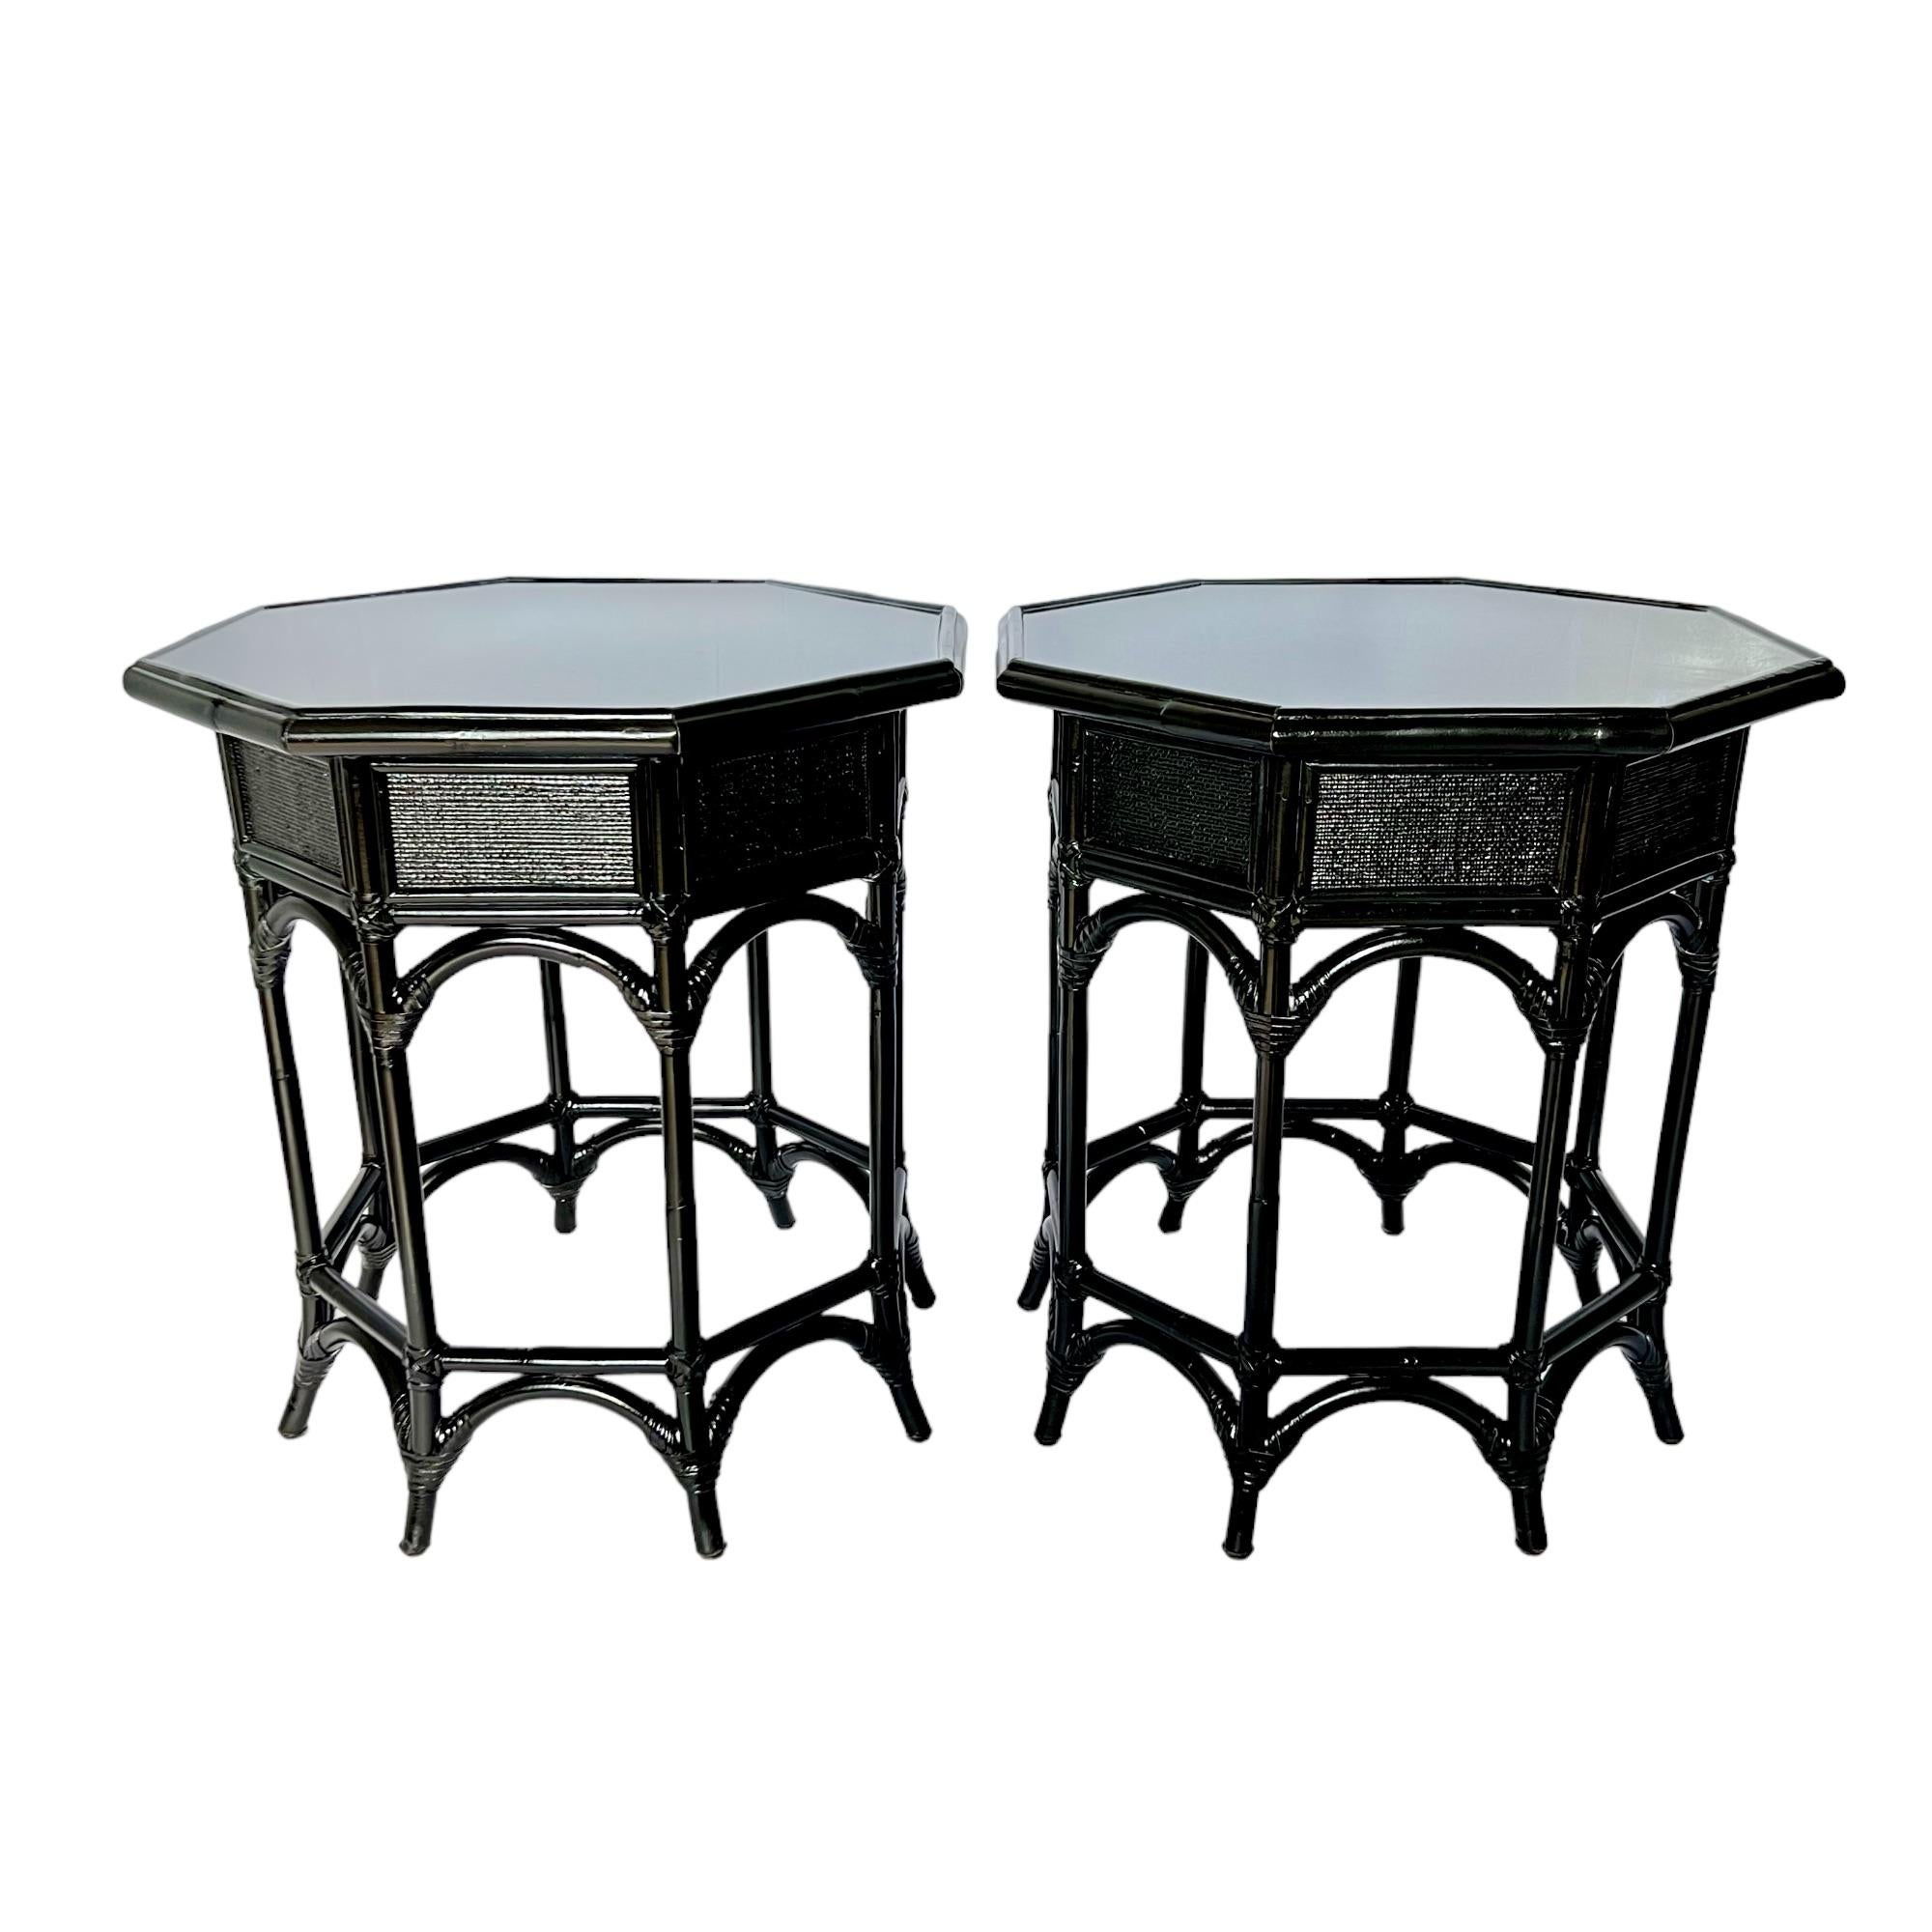 These vintage chinoiserie octagonal rattan tall accent tables have been custom refinished in semi-gloss black with inset epoxy resin tops. They feature woven apron panels, eight saber style out-turned legs connected by arched and straight